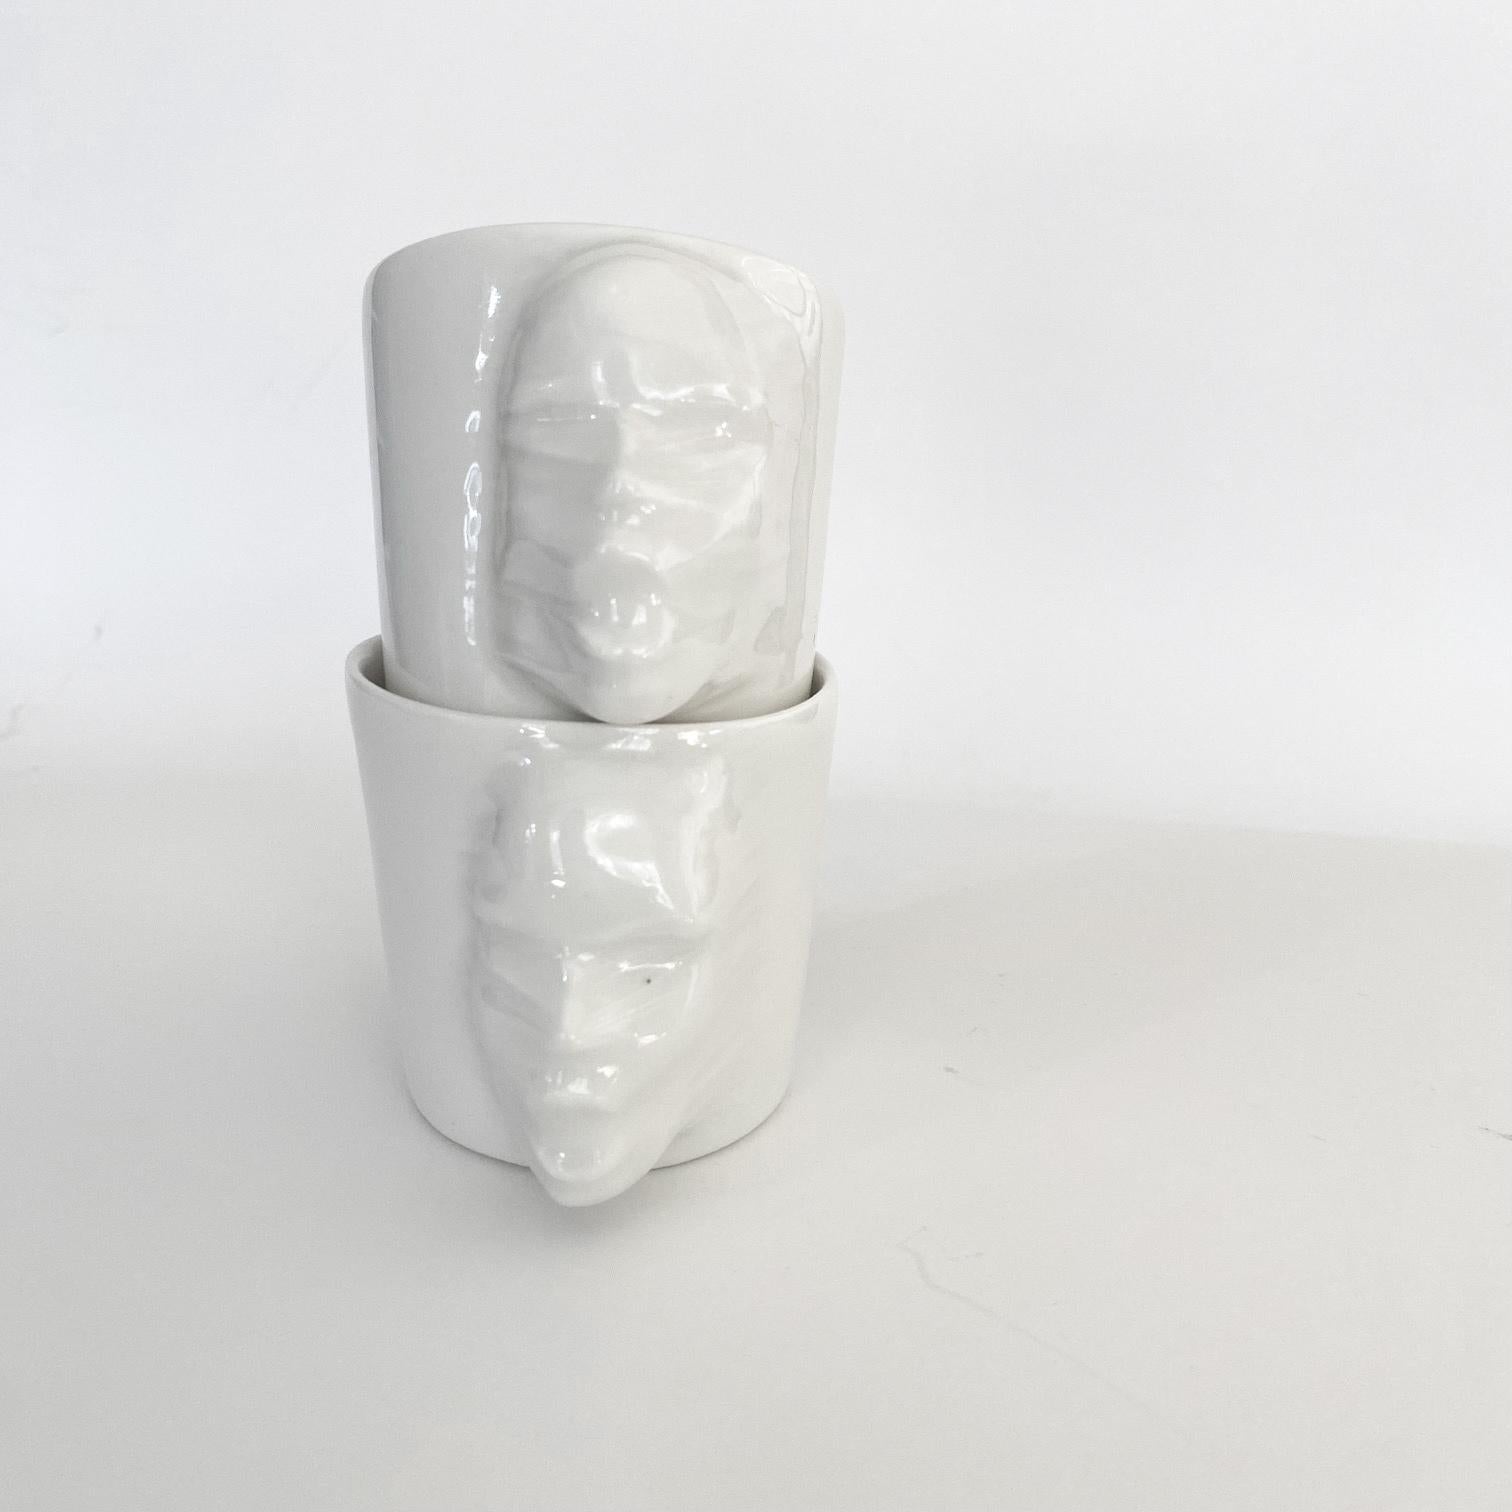 Turkish Sculptural Porcelain Cups Set of 2 by Hulya Sozer, Face Silhouette, White For Sale